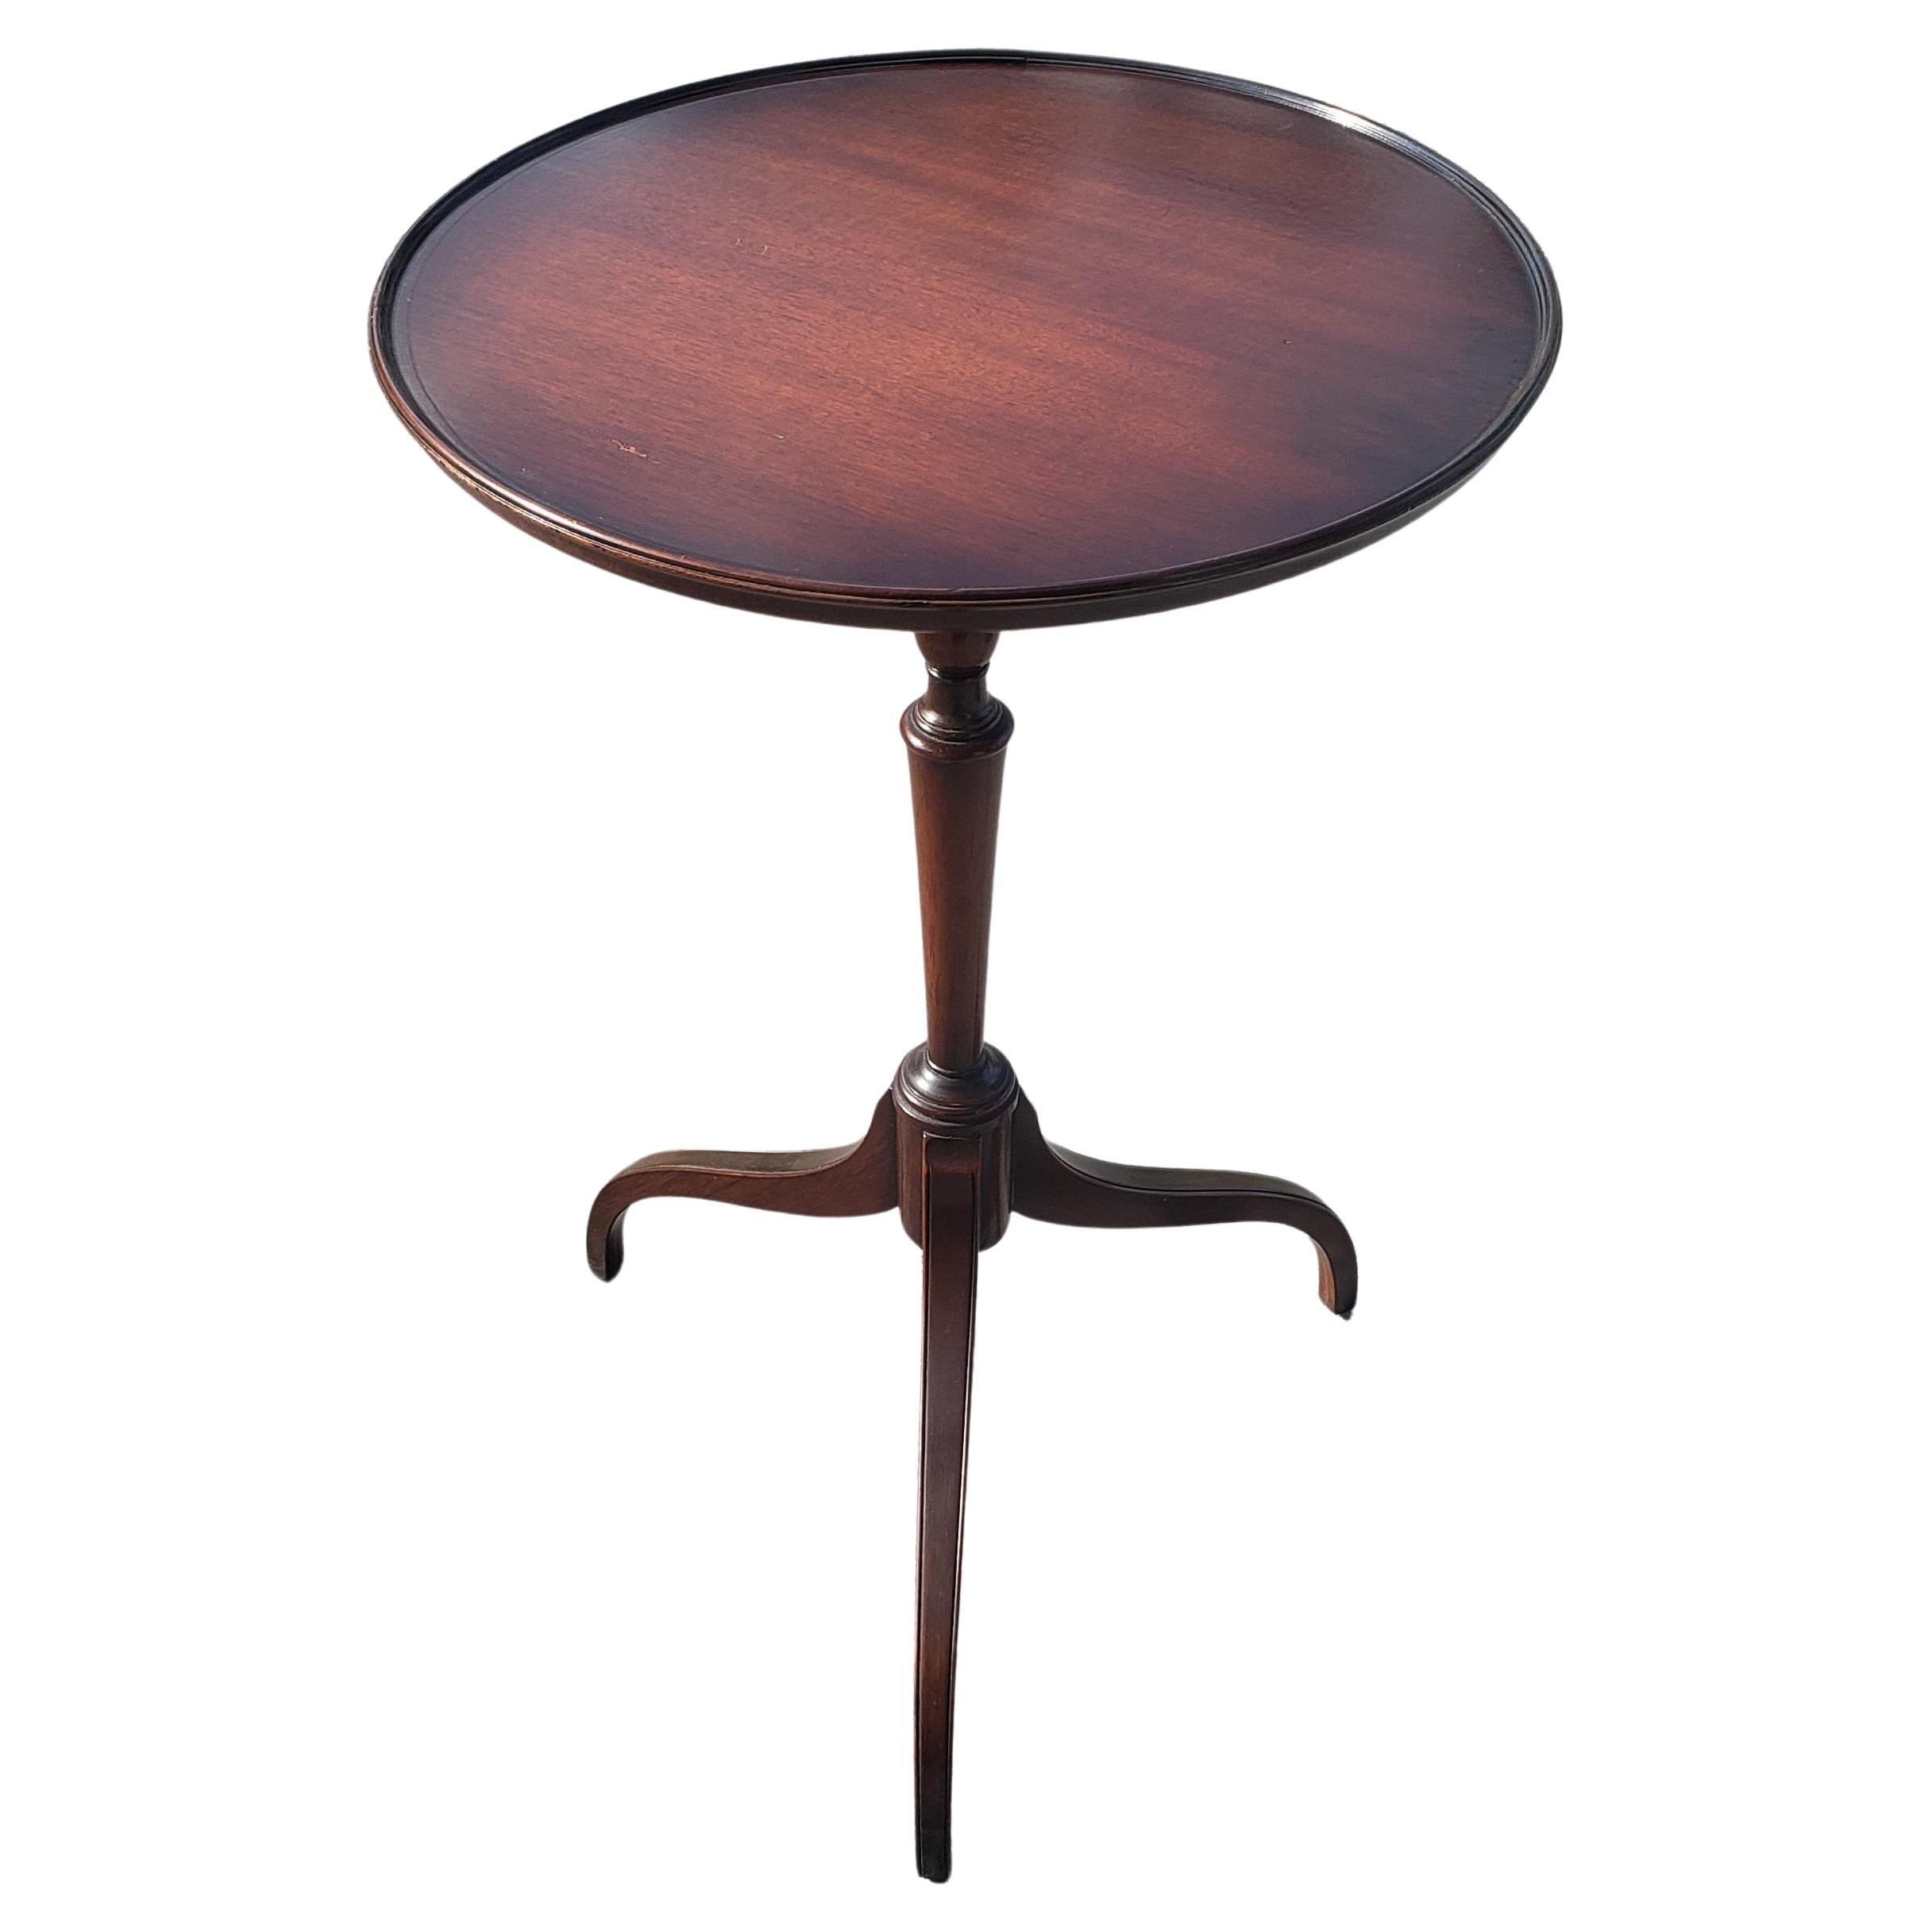 Kittinger Coronet Finish Mahogany Candle Stand Side Table For Sale